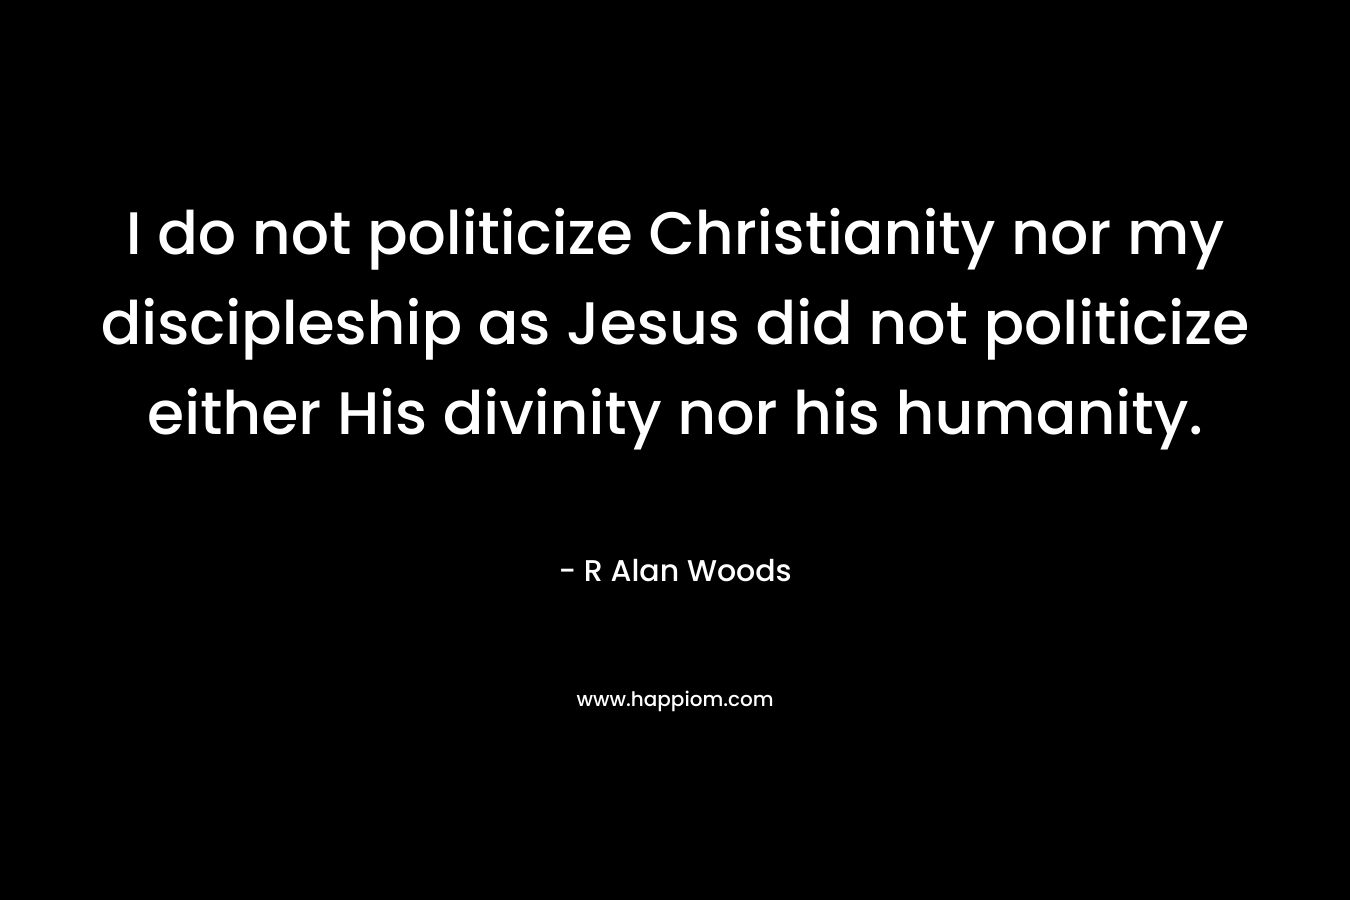 I do not politicize Christianity nor my discipleship as Jesus did not politicize either His divinity nor his humanity. – R Alan Woods